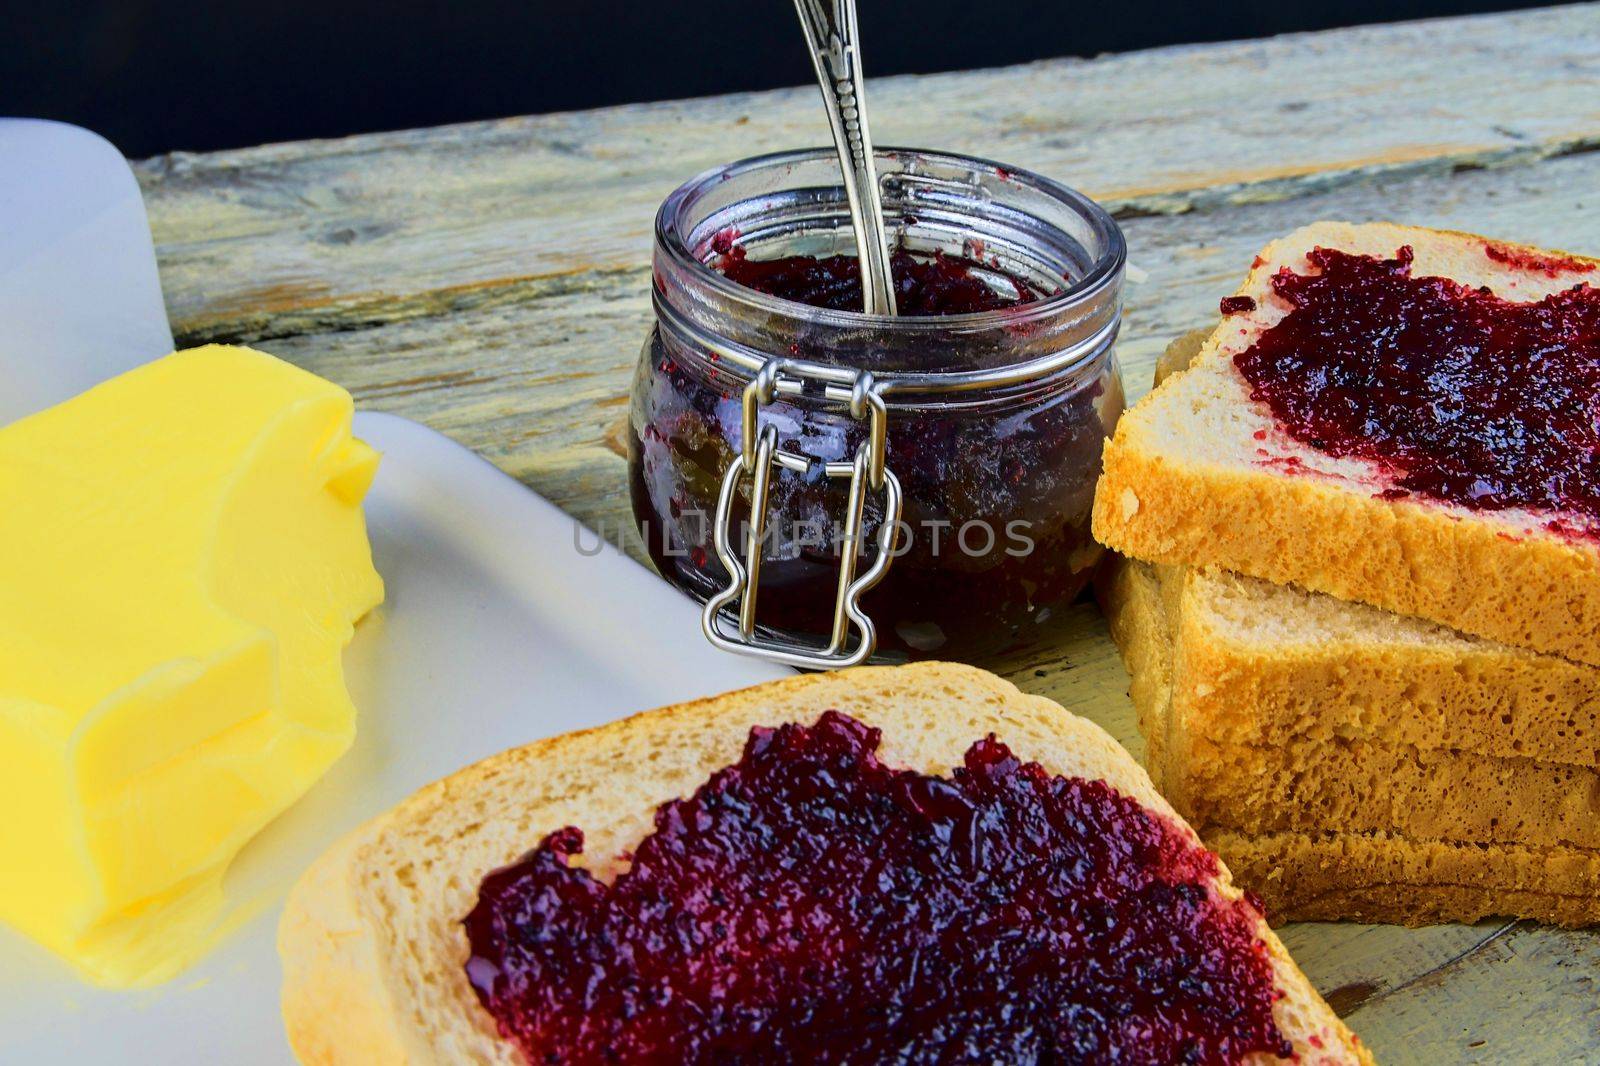 Jam, butter in butter dish and jam spread on toast. Healthy and diet concept. Rural white wooden background.